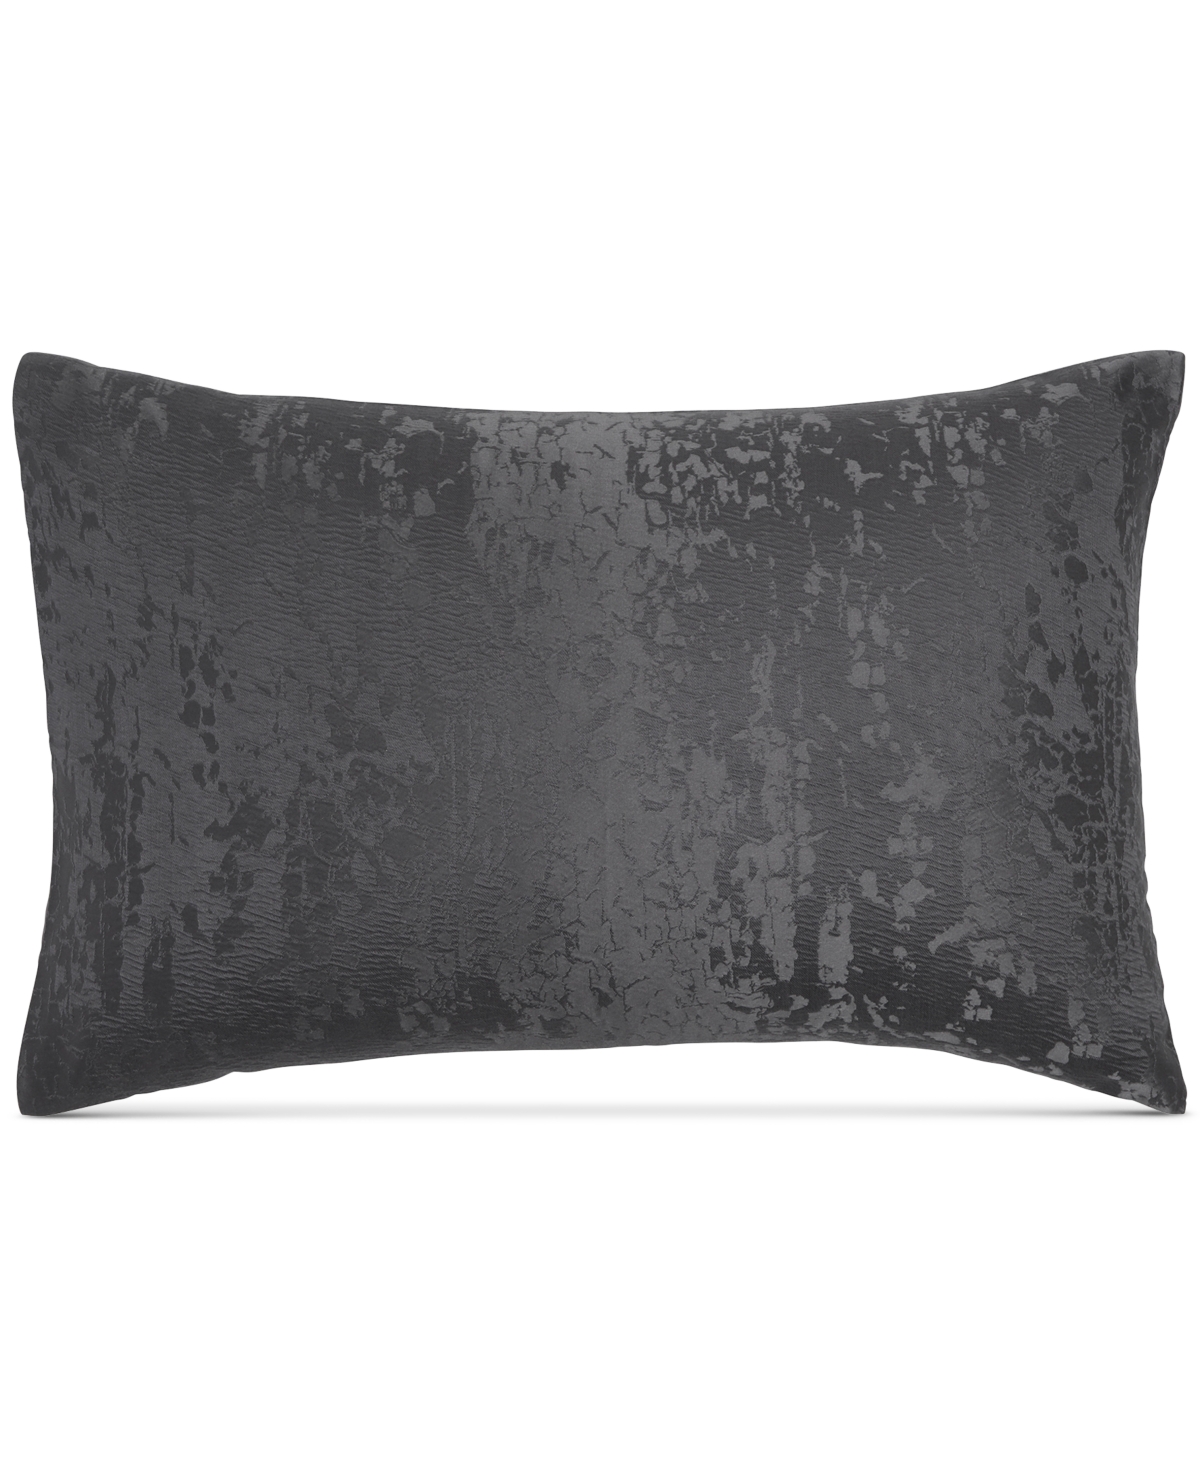 Home Moonscape Reversible Textured Jacquard Charcoal Standard Sham - Charcoal